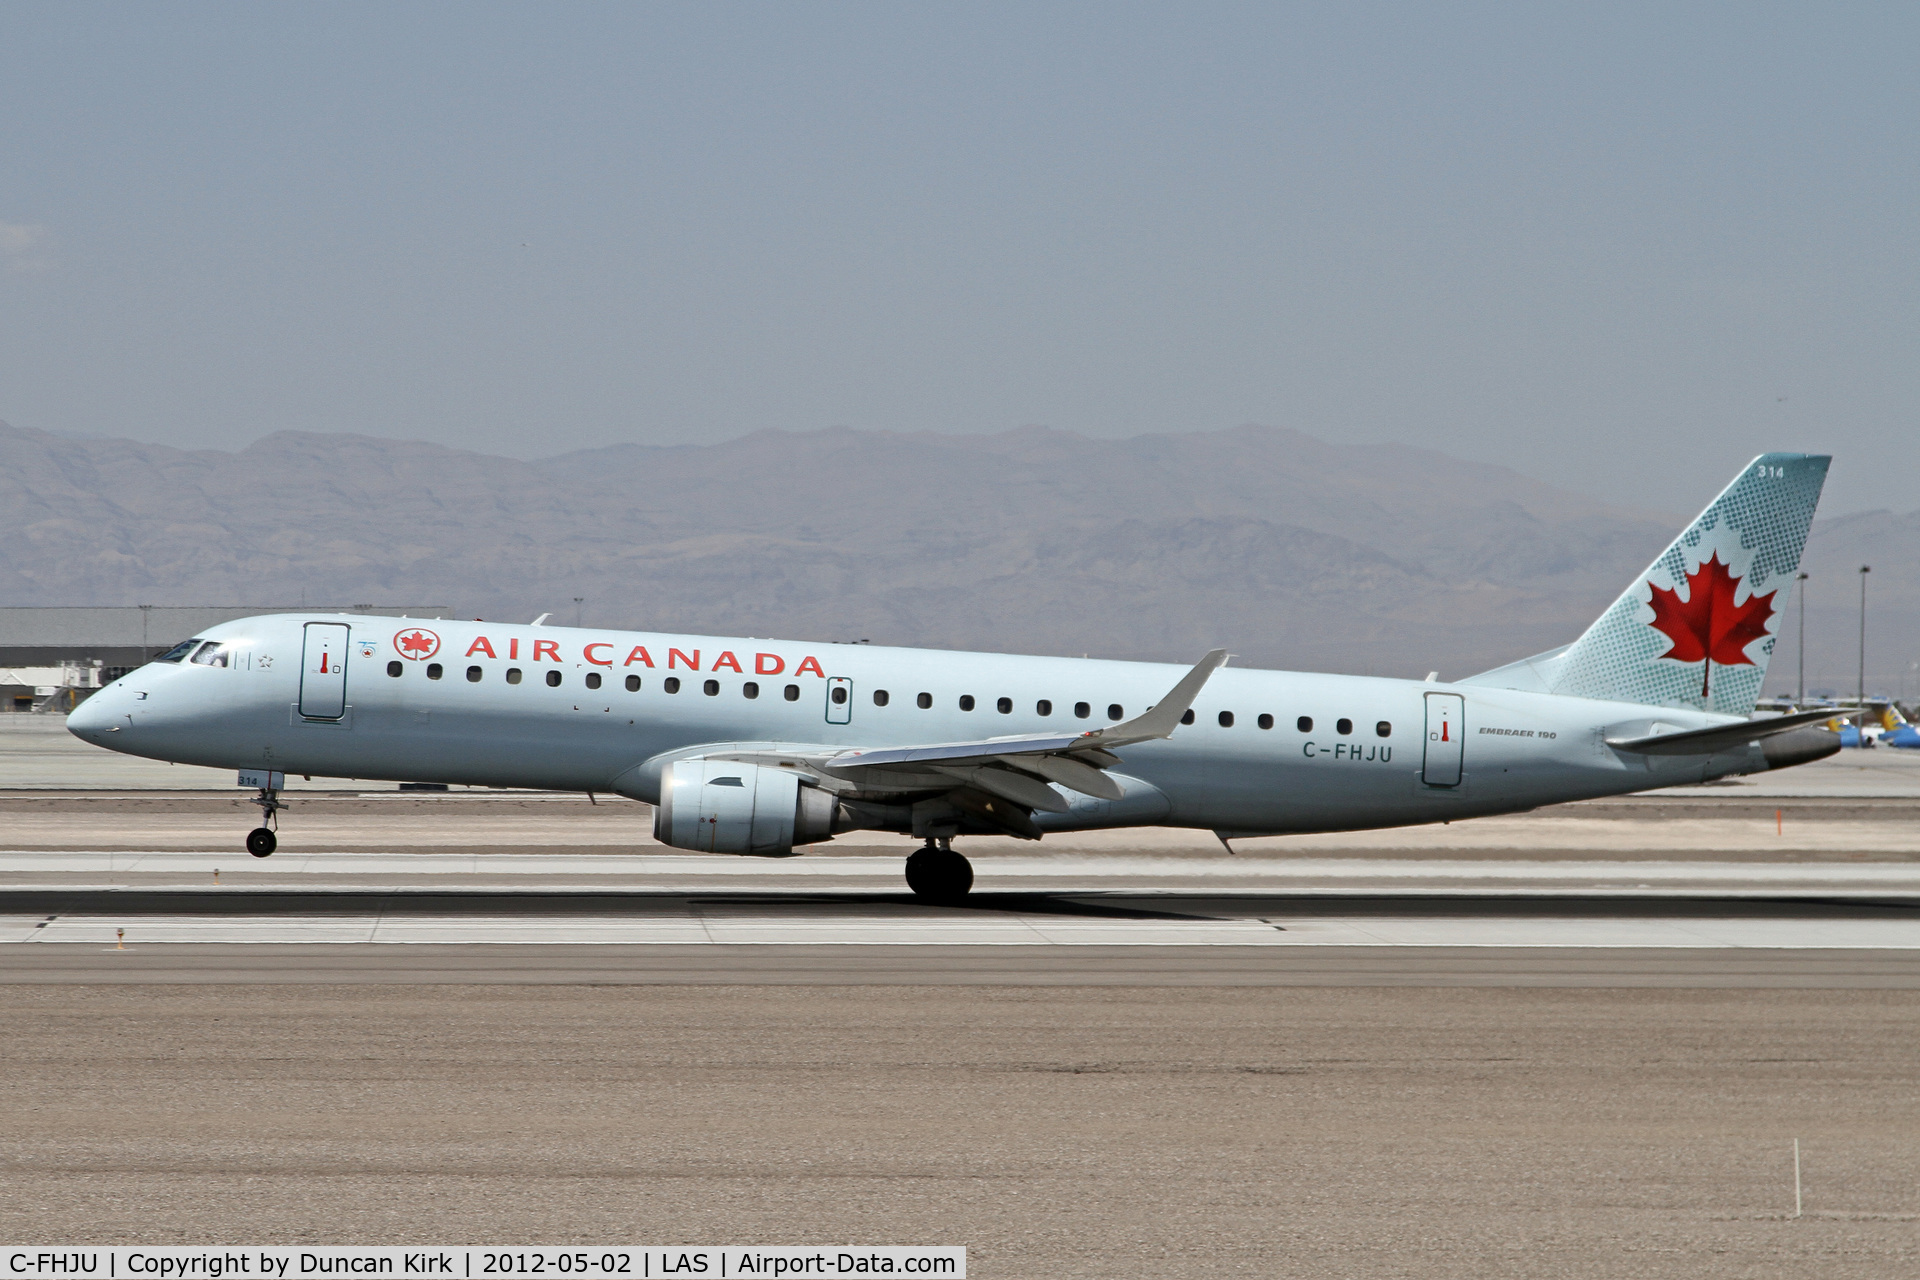 C-FHJU, 2006 Embraer 190AR (ERJ-190-100IGW) C/N 19000044, Taken from the famous viewing spot at Las Vegas